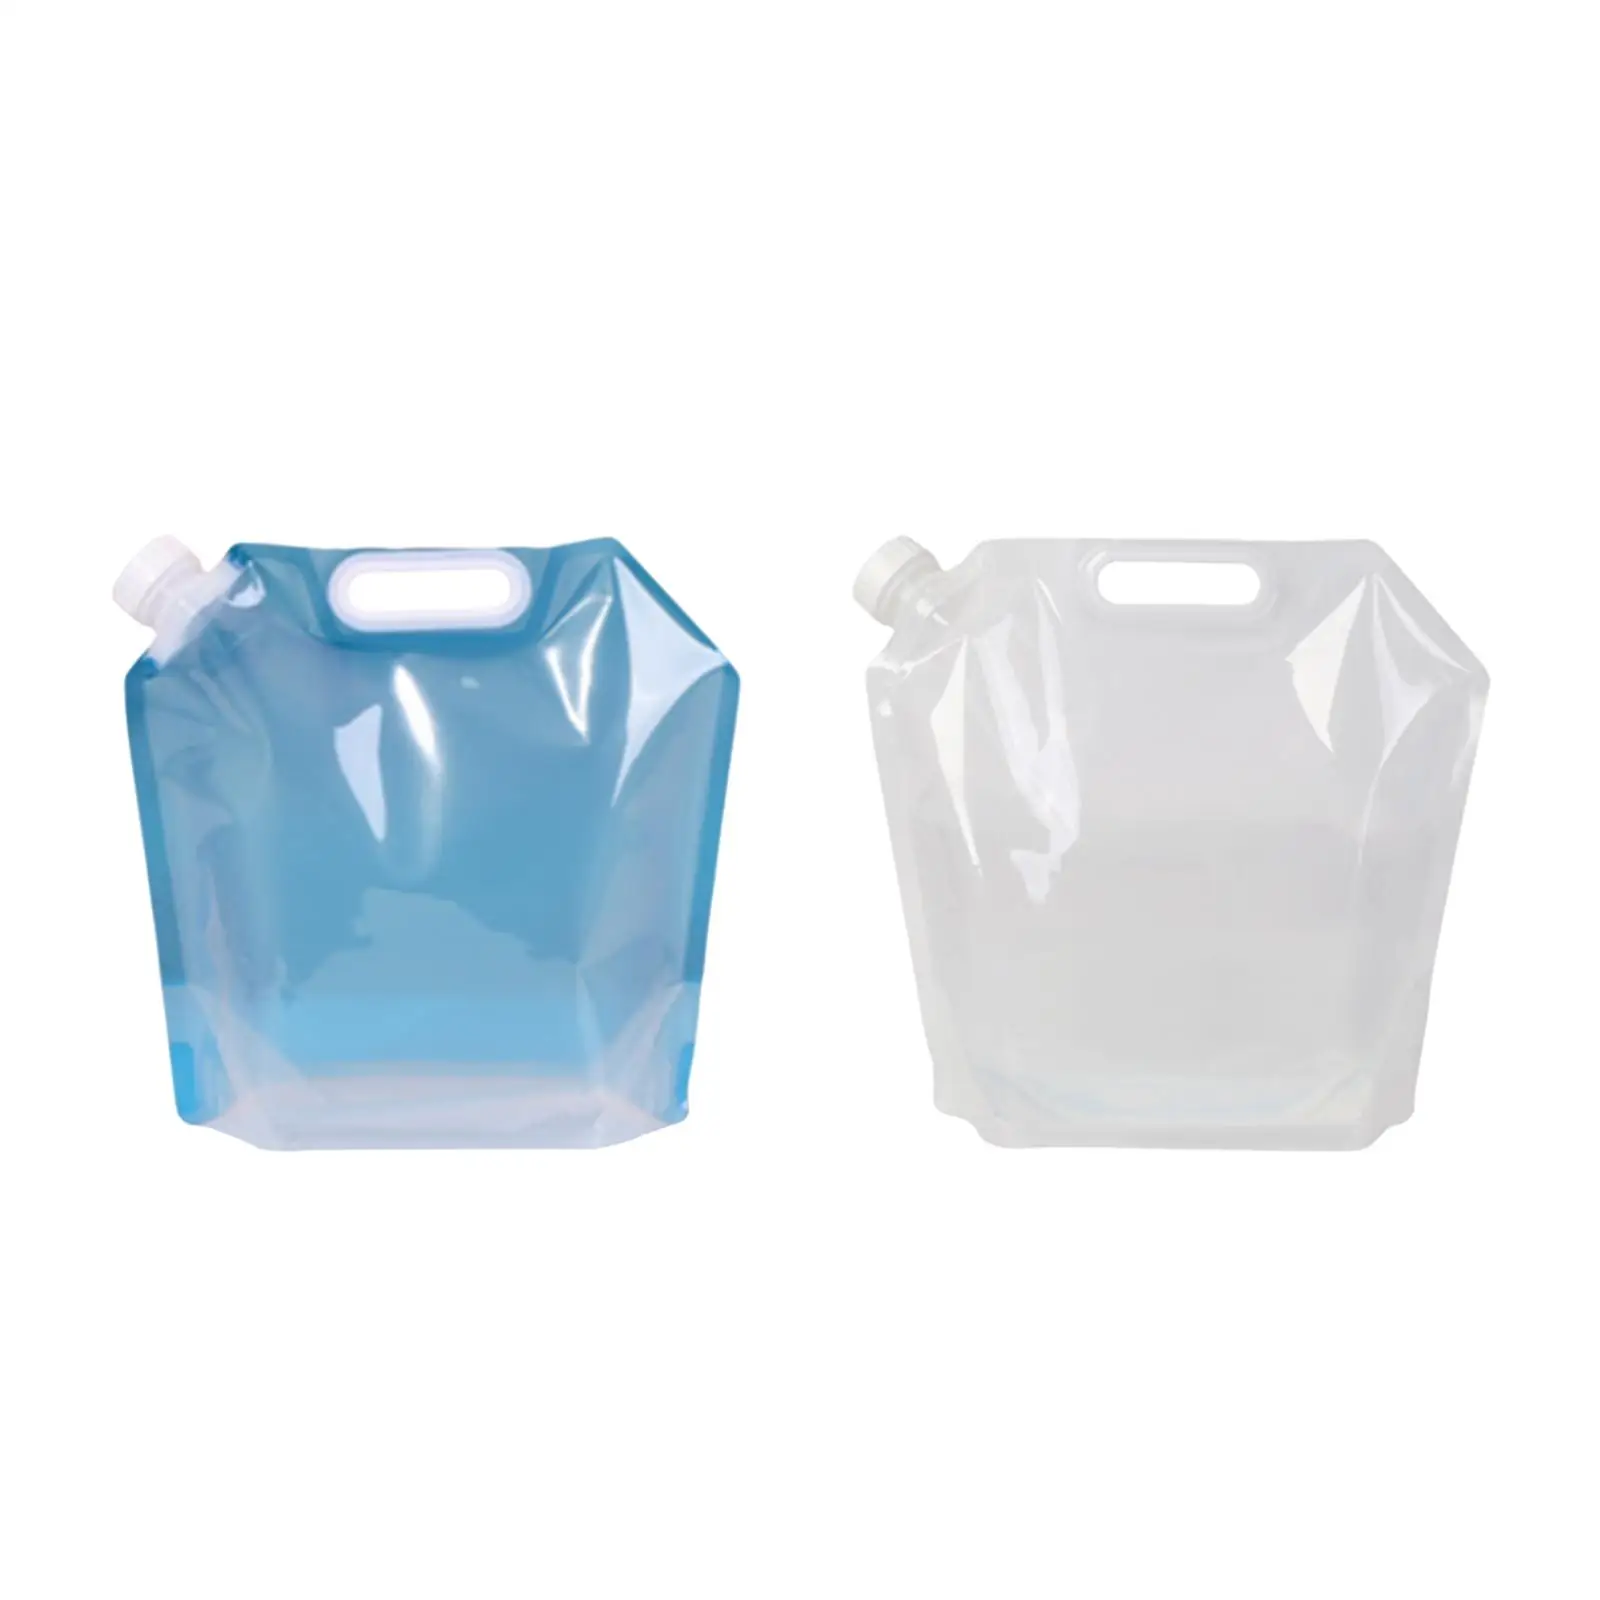 Outdoor Folding Water Bag Carrier 5 Liters Outdoor Drinking Tool Easily Fill and Pour Out 32.5x30cm Leak Proof with Handle